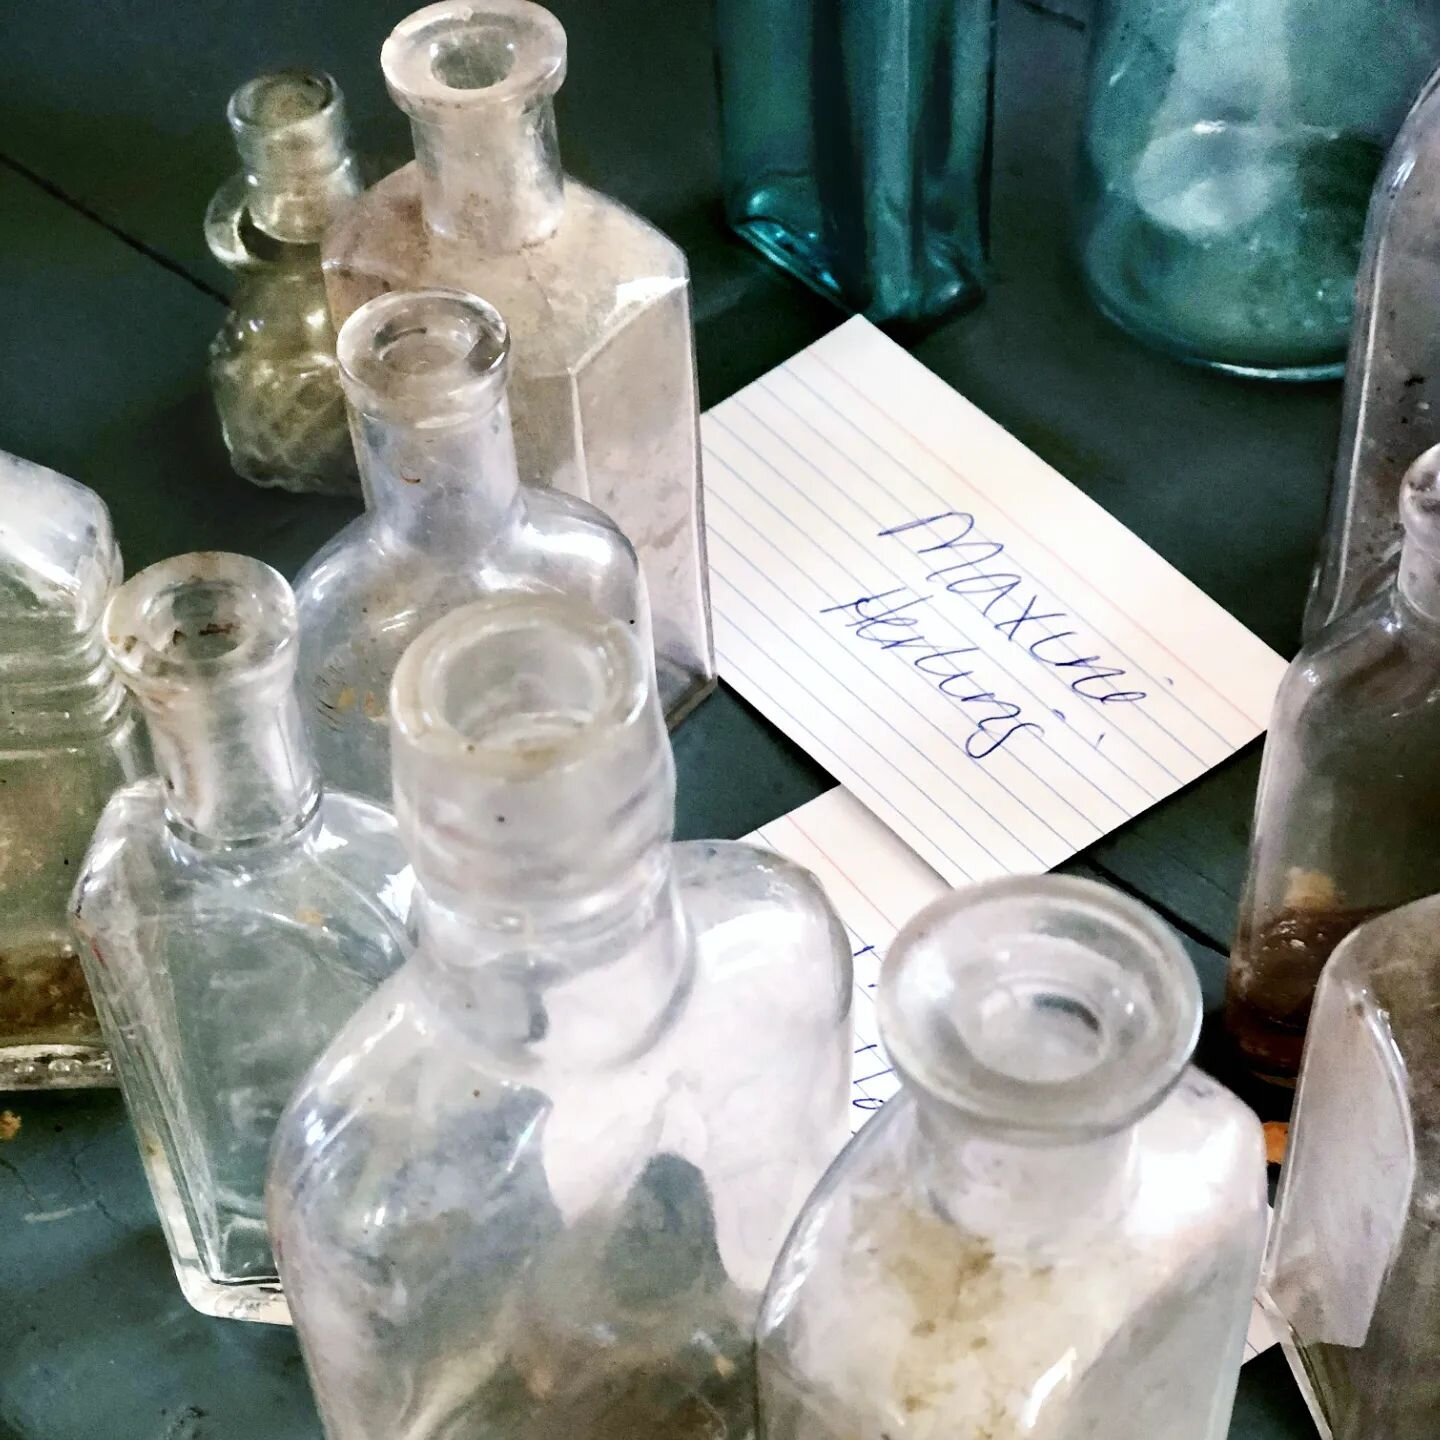 Glass bottle collection belonging to Maxine&nbsp;Herling, one of the former presidents of the Historical Society. She was instrumental in the efforts to restore the Union Church's steeple and&nbsp;save Durham's very own Revere Bell! 

Donated by the 